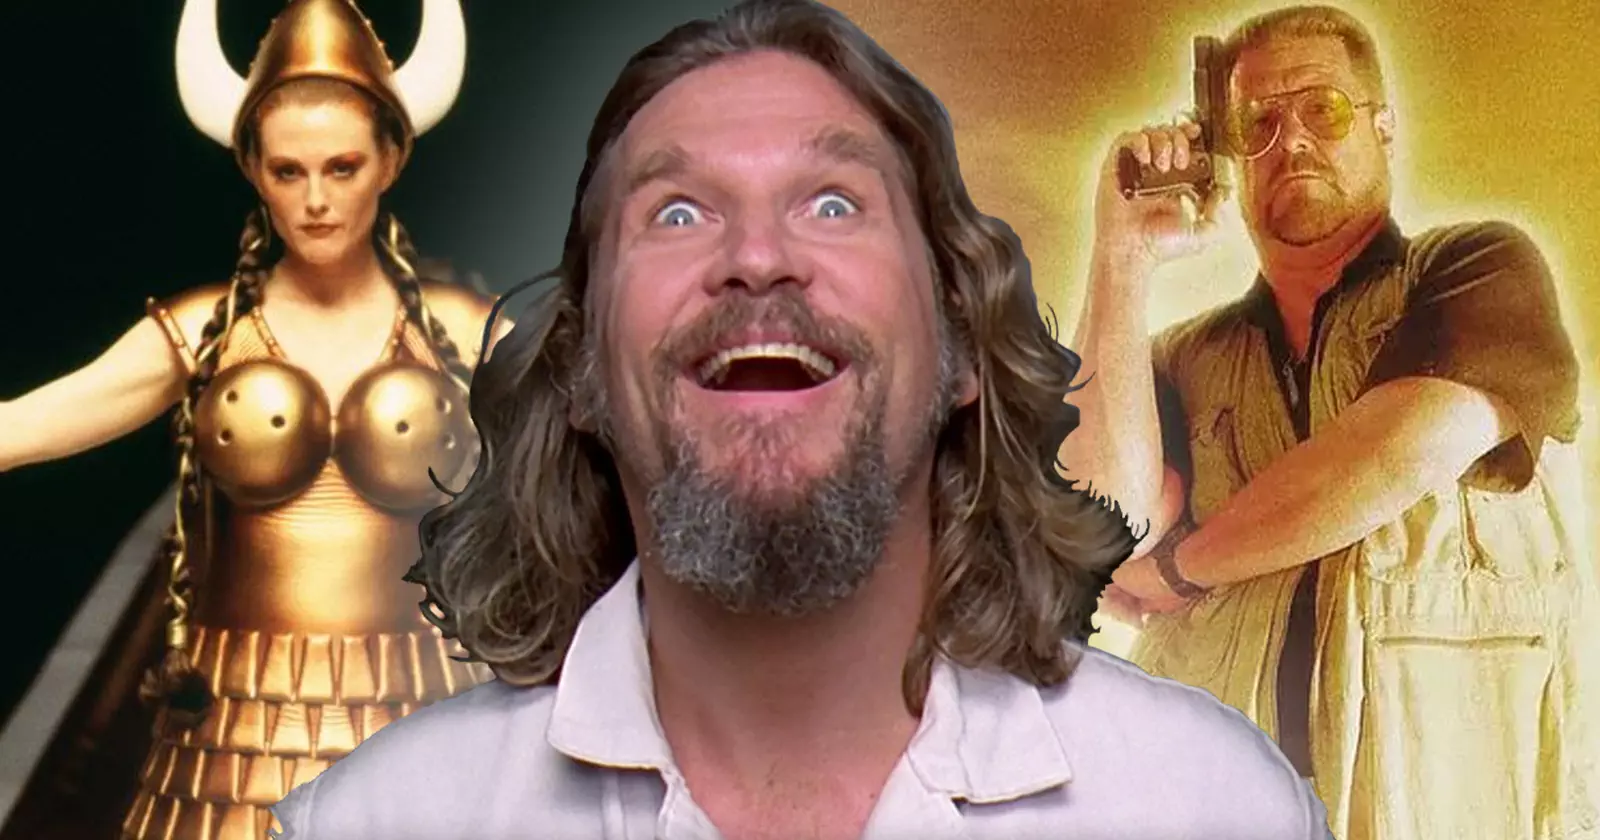 The Big Lebowski at 25: Looking Back at the Idiosyncratic Cult Classic Sensation